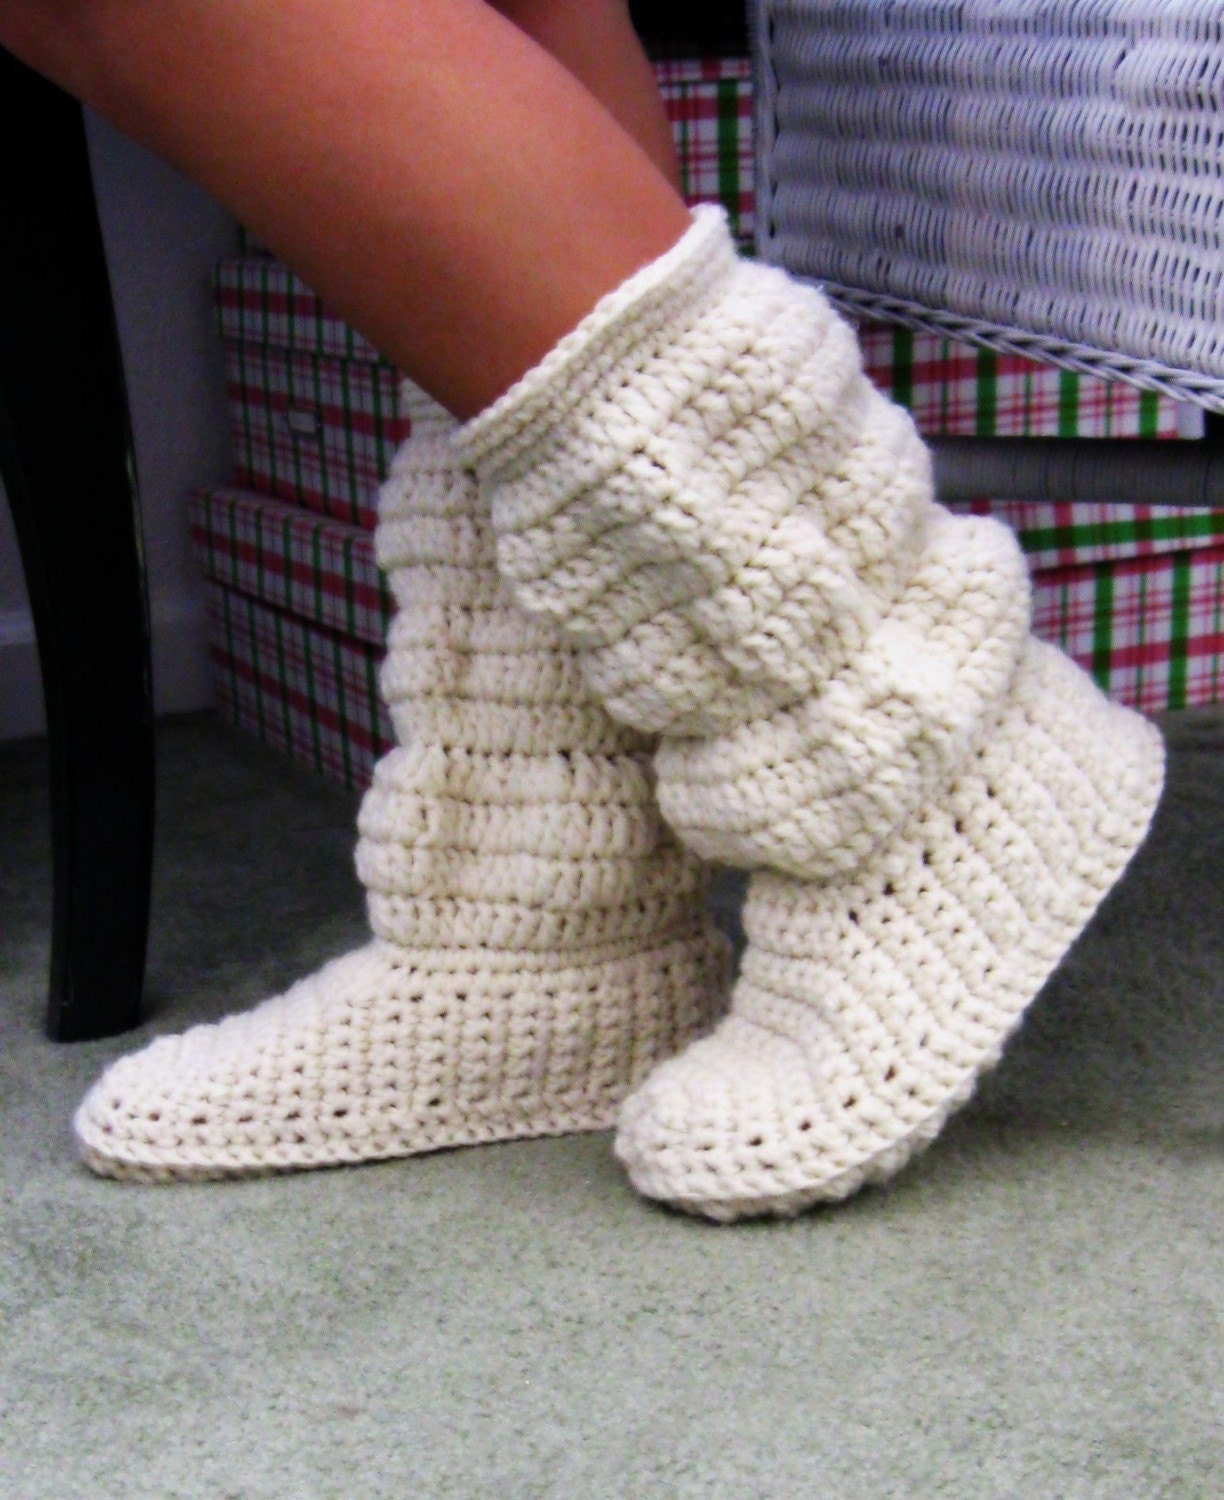 Indie Fashion and Beauty: Fabulous Sweater Slipper Boots!